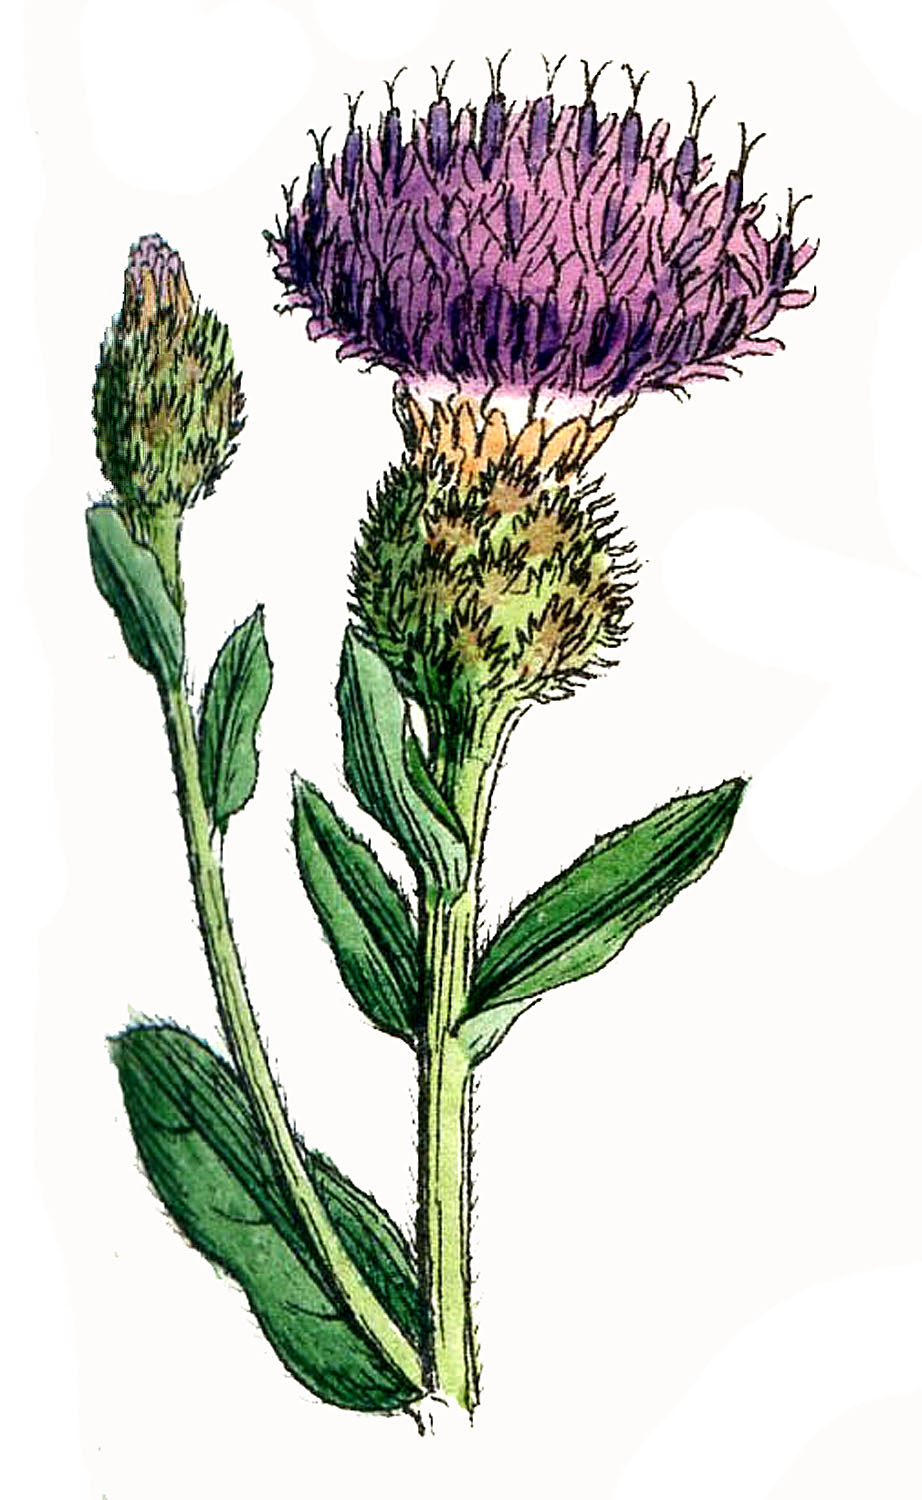 6 Thistle Images - Rustic Flowers! - The Graphics Fairy